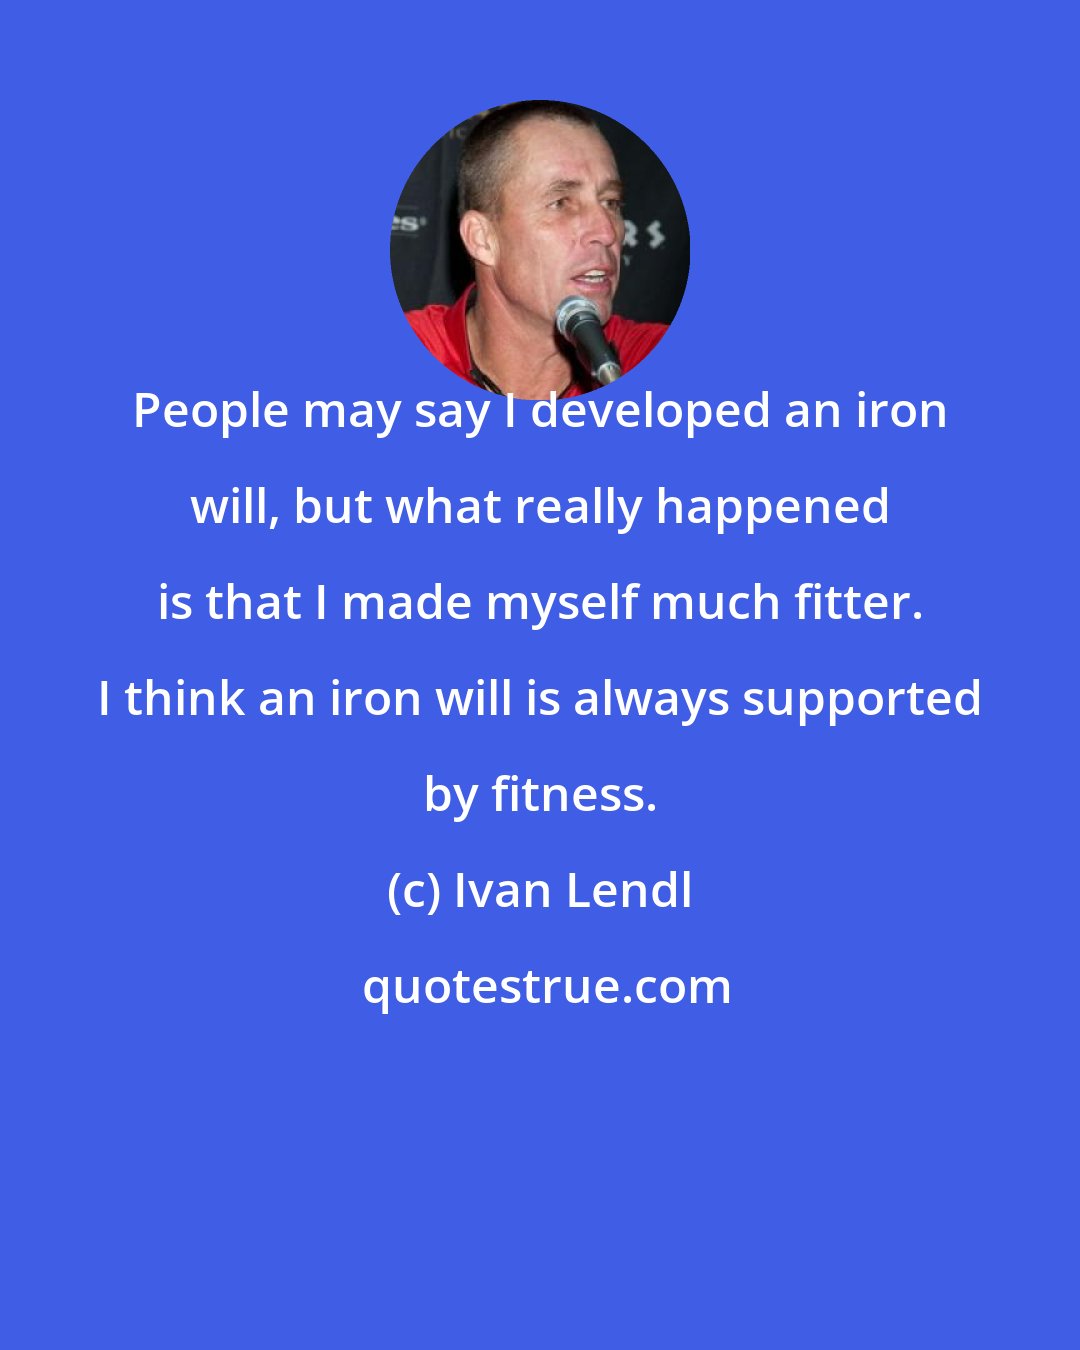 Ivan Lendl: People may say I developed an iron will, but what really happened is that I made myself much fitter. I think an iron will is always supported by fitness.